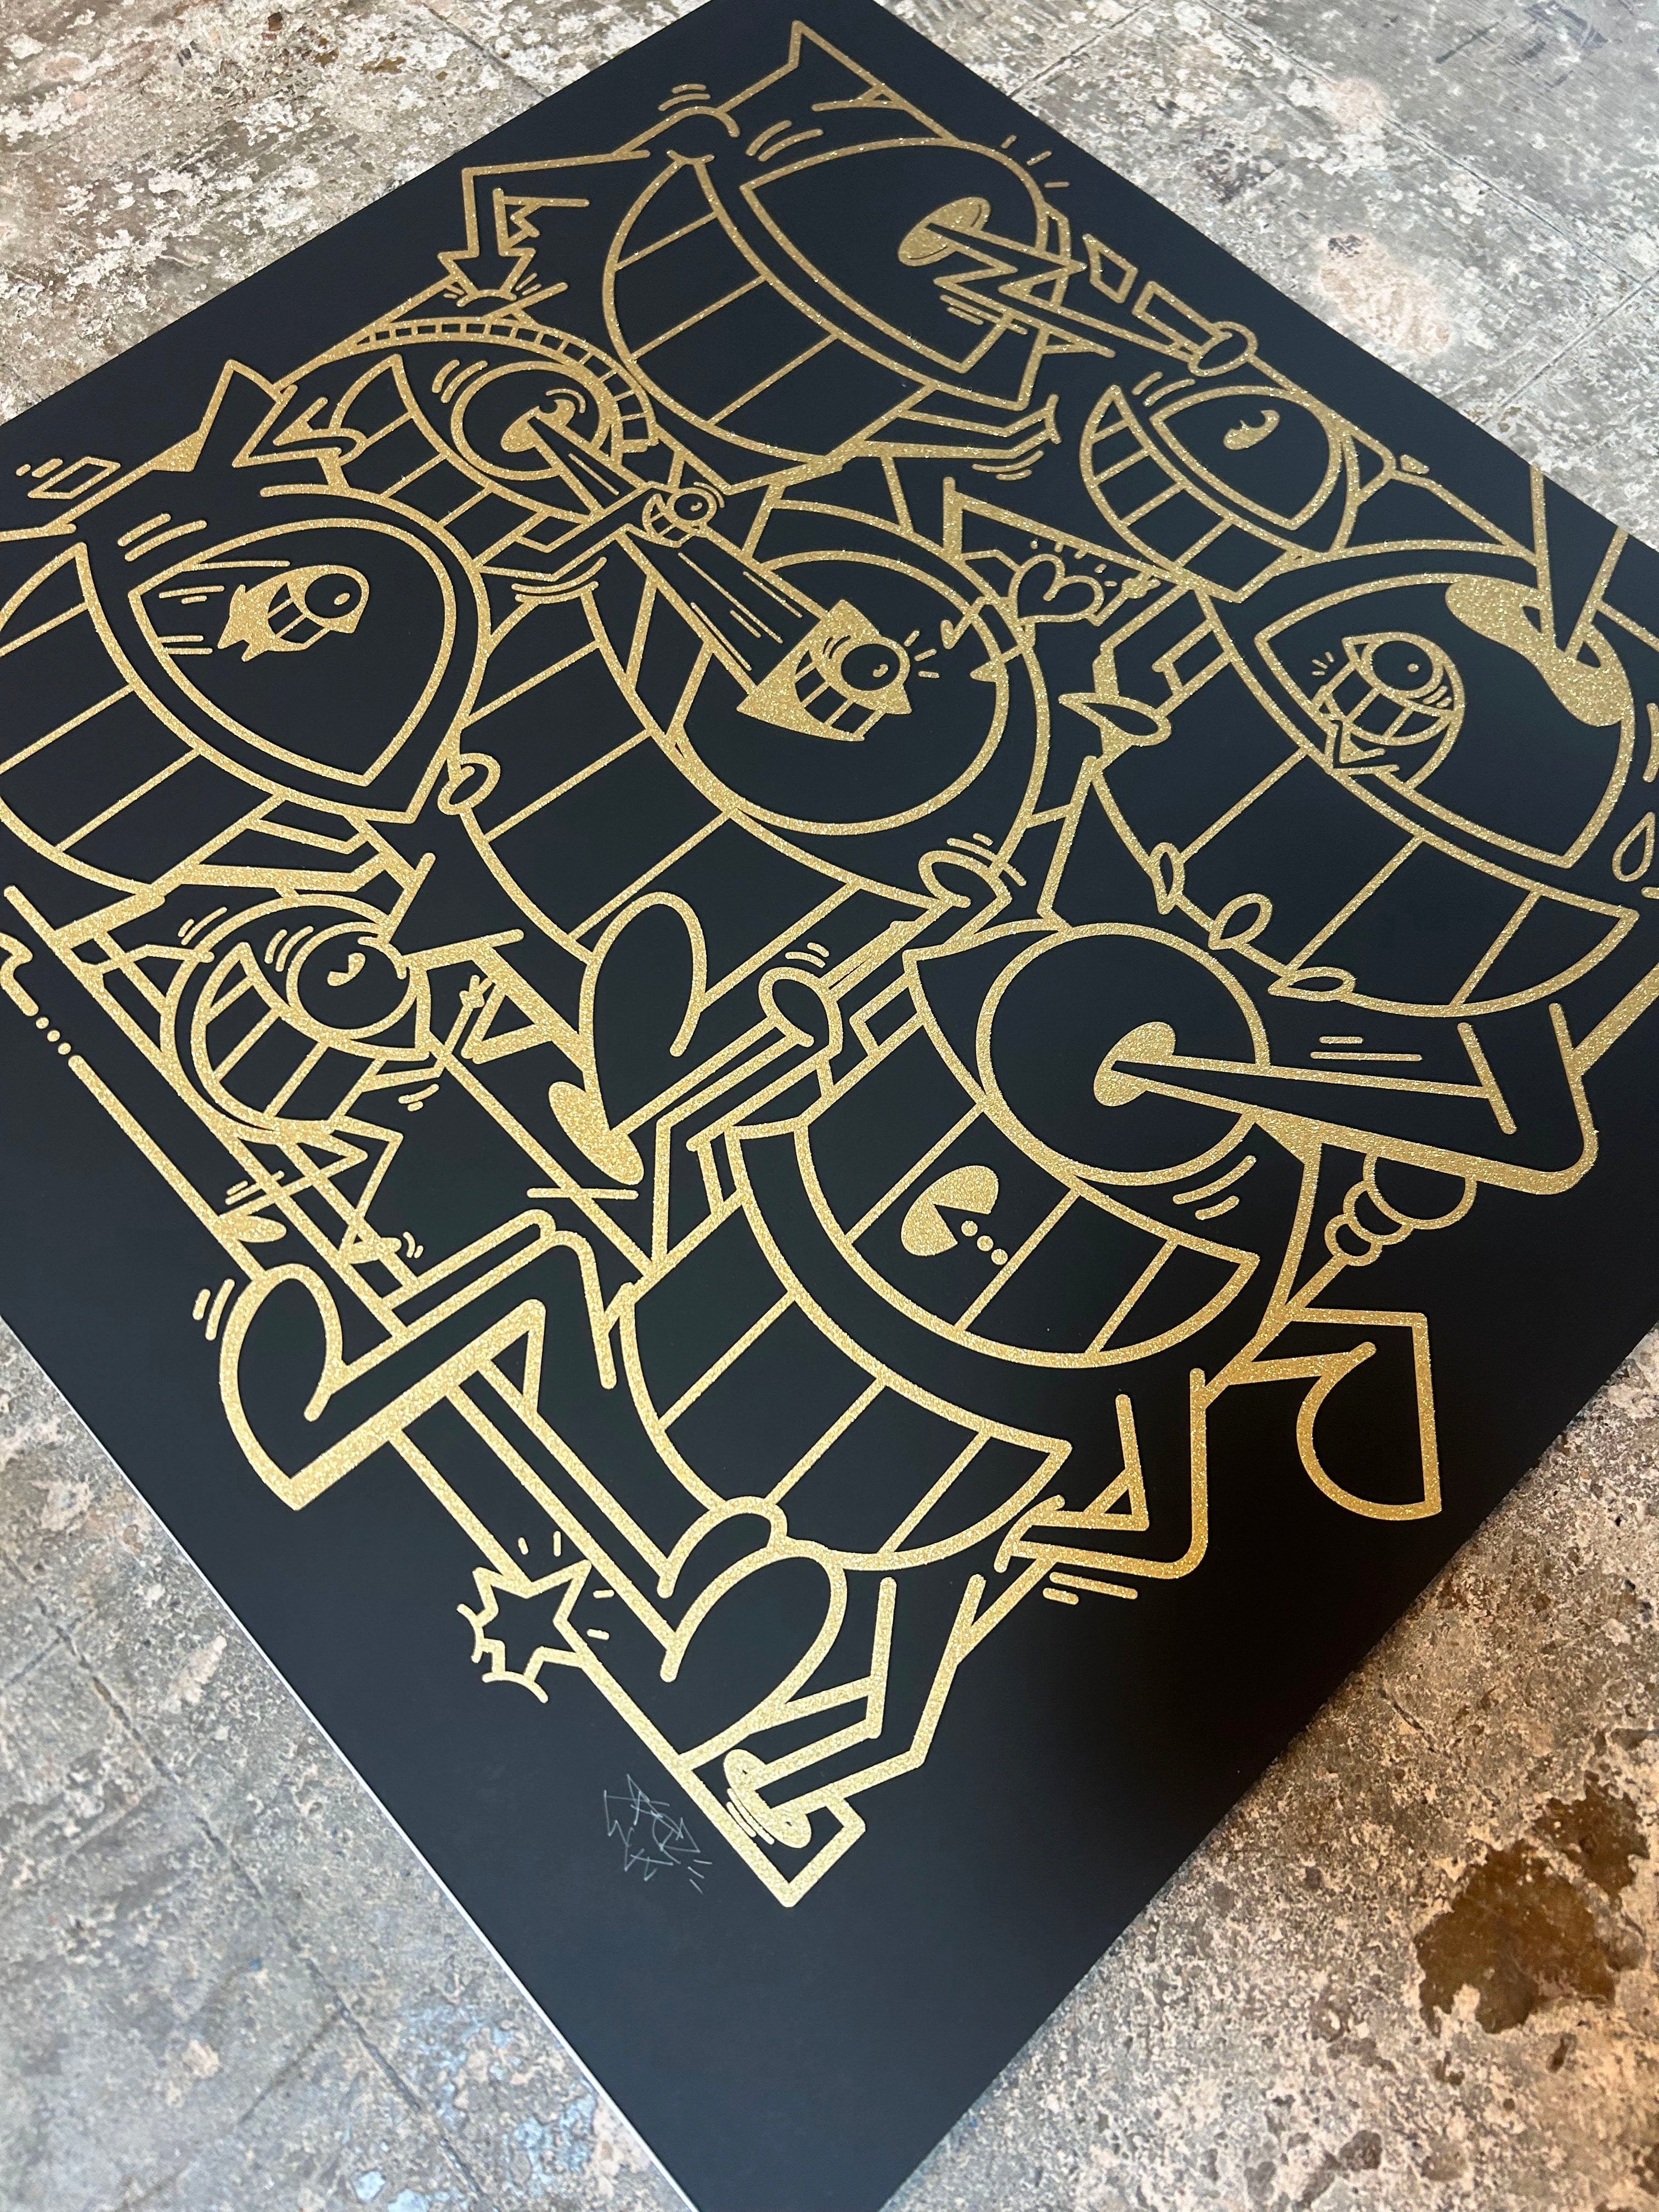 EL PEZ - SMILES IN STYLE BLACK GOLD GLITTER - ed 10 with free mini screen print for colouring in